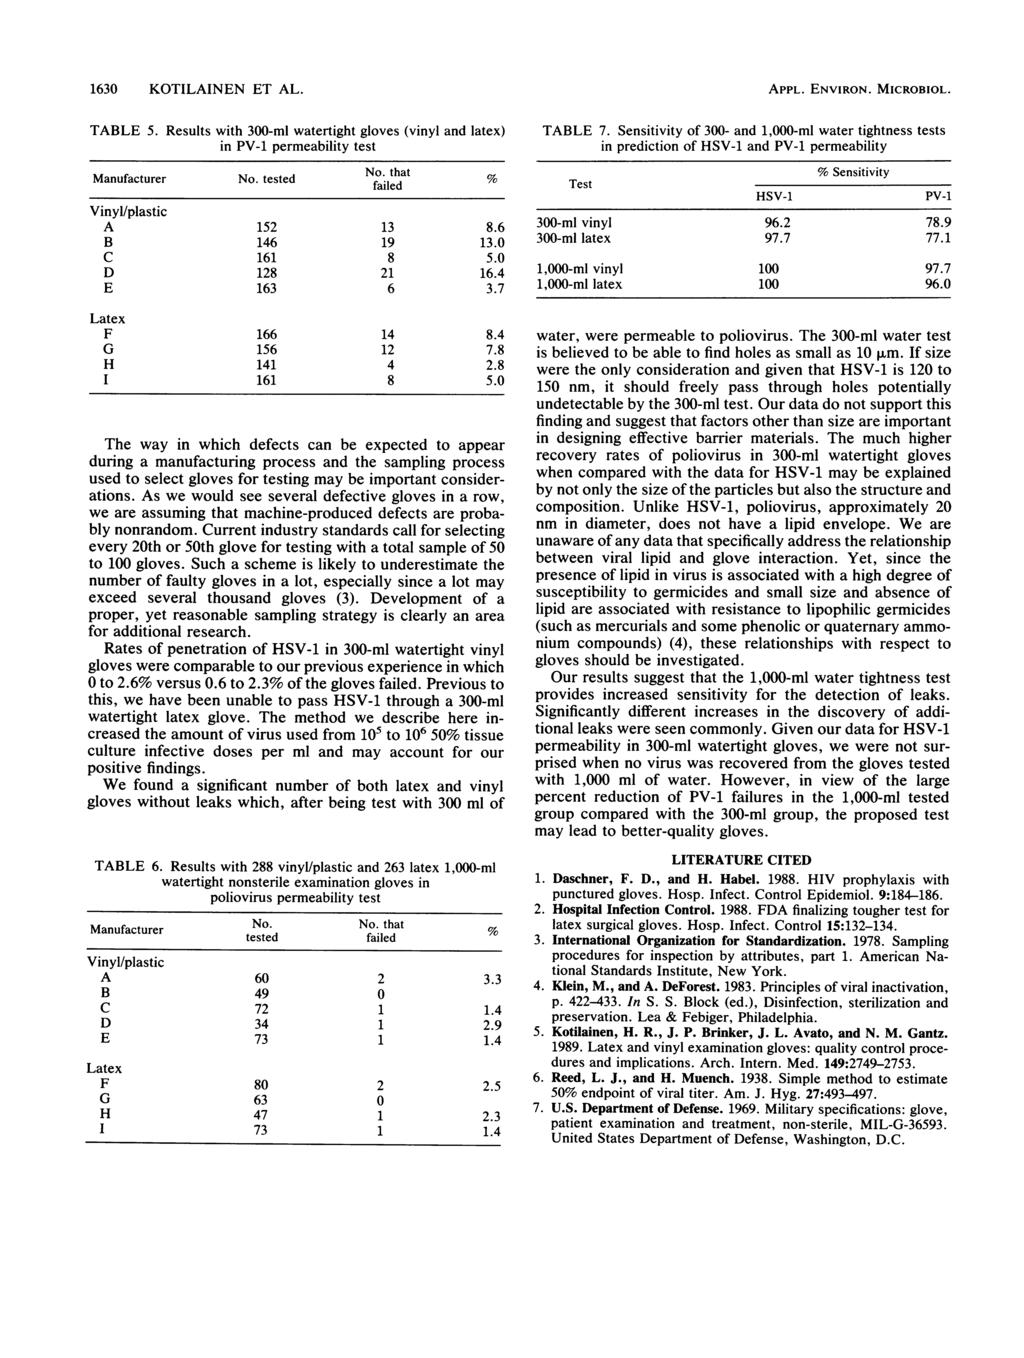 1630 KOTILAINEN ET AL. TABLE 5. Results with 300-ml watertight gloves (vinyl and latex) in PV-1 permeability test Manufacturer No. tested No. that % A 152 13 8.6 B 146 19 13.0 C 161 8 5.0 D 128 21 16.